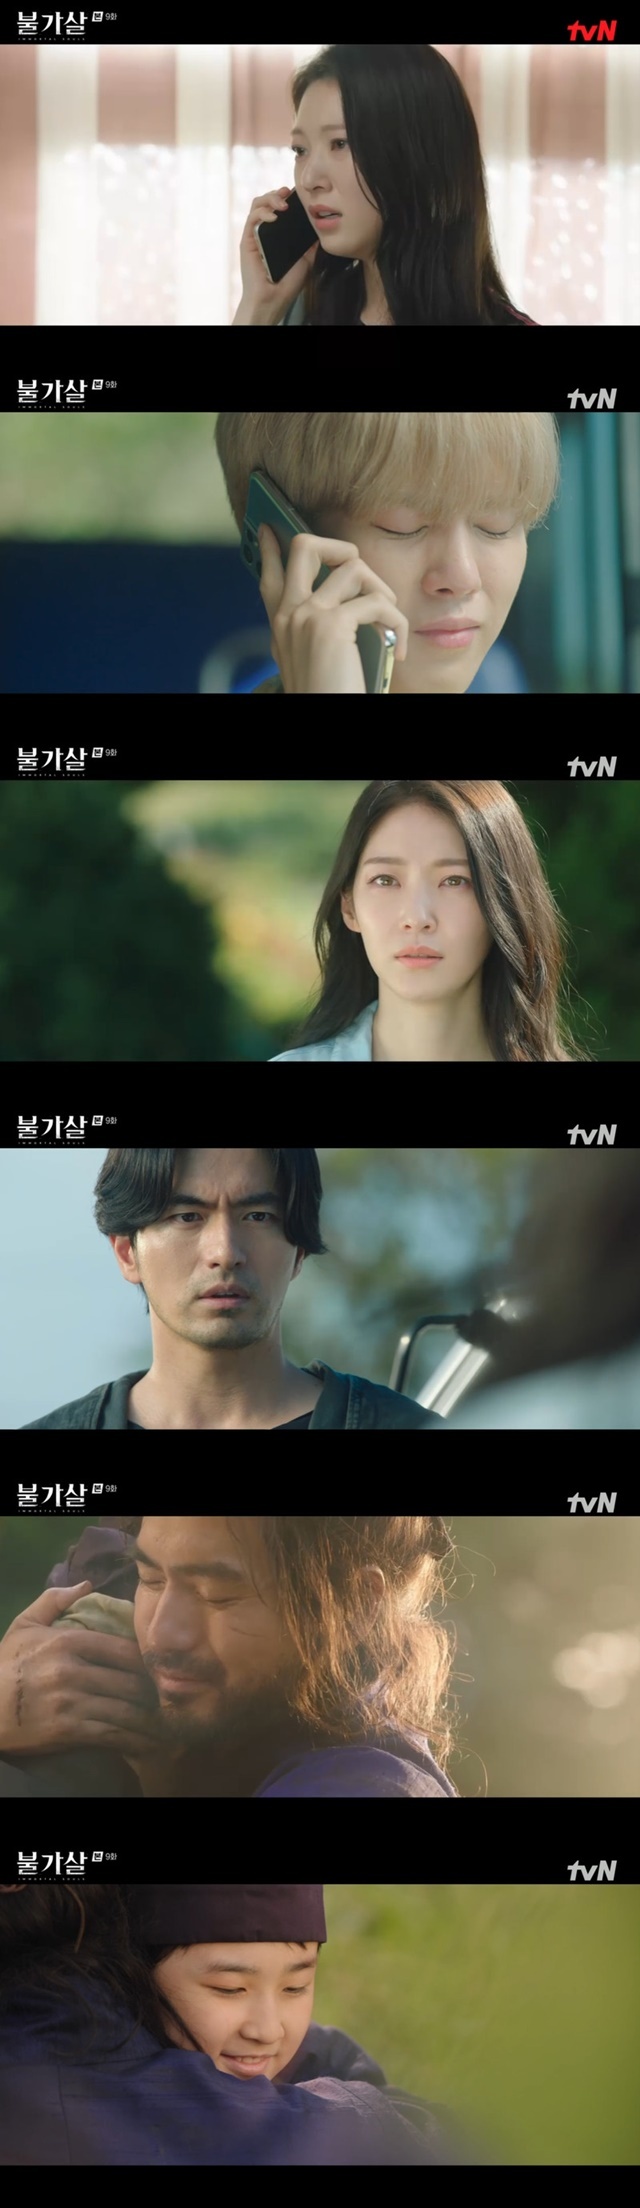 Lee Jin-wook found out that my son was Kim Woo-suk 600 years ago.In the 9th episode of TVNs Saturday drama Irreplaceable You Sal (playplayed by Kwon So-ra, Seo Jae-won/directed by Jang Young-woo), which aired on January 15, I learned that Lee Jin-wook was my son Achan 600 years ago.Min Sang-woon (Kwon Na-ra) told Lee Jin-wook, I killed your family 600 years ago, and Ok Eul-tae was angry, saying, Are you cheating on yourself now?Dan-hwal, who was given drugs to Ok Eul-tae, blocked the attack on Min Sang-woon and warned him that he would come back to check it out. Dan-hwal was left with the support of Min Sang-woon and Kwon Ho-yeol (Jeong Jin-young).Ok Eul-tae, the only person left, recalled his past life a thousand years ago.Ok Eul-tae was the eldest son of Kwon Ho-yeol in his previous life, and when Kwon Ho-yeol spared his half-brother than he did, he killed his half-brother and framed Irreplaceable Yousal (Min Sang-woon).Dan-hwal went to Grandmas Boy together to confirm Min Sang-woons words, but Grandmas Boy was scared to know that Dan-hwal was a man with scars on the back of his hand and said nothing.Min Sang-woon informed her ability to see her younger brother Min Si-ho (played by Gong Seung-yeon)s past life in order to find another witness who saw Ok Eul-tae, who hurt Dan-hwals family 600 years ago.Danhwal asked Minshiho if he could see his past life, and Minshiho tried to see his past life and failed.Min Sang-woon wondered why Dan-hwal wanted to see Minshihos past life without looking for his dead family.Ok Eul-tae ordered Nam Woo-suk to bring Min Sang-woon separately, and Nam Do-yoon was in conflict.Nam Do-yoon asked Dan-hwal for advice, saying that he would give him what he and his brother did not want to do. After cutting him off with a single knife, he contacted the Hungsinso to find out about Nam Do-yoons sponsor.Kwon Ho-yeol knew that Dan-hwal was looking for a supporter of Nam Do-yoon.Hye-seok (Park Myung-shin) bought a congratulatory cake after learning about Minshihos pregnancy, and was surprised to learn about Danhwal and Nam Do-yoons pregnancy of Minshiho.Dan-hwal expected that Achan, who was the son of himself and Dansol in his past life, would be born and met again as the son of Minshiho.Nam Do-yoon met with his patron, Ok Eul-tae, at the nursery, and first held hands and asked for help.Nam Do-yoon confessed all the facts before taking Min Sang-woon to Ok Eul-tae, who tried to leave for a place where no one knew, but Dan-hwal first found the two.Dan-hwal just found out that Nam Do-yoons supporter was a jade-tae through Kwon Ho-yeol, and he kicked out Nam Do-yoon, saying, I will kill him if I see him again.Nam Do-yoon told Ok Eul-tae by phone that his brother knew all about it.When Nam Do-yoon asked the hospital where his brother was, Ok Eul-tae said, I died. I did not tell you that you would be sad.Min Siho later called Nam Do-yoon to find out that he was a traitor, but then heard all the previous stories from Nam Do-yoon. Min Si-ho told Dan-hwal, Do-yoon told his brother that he had operated on his brother.Doyun Lee has not seen his eyes since he was born. 